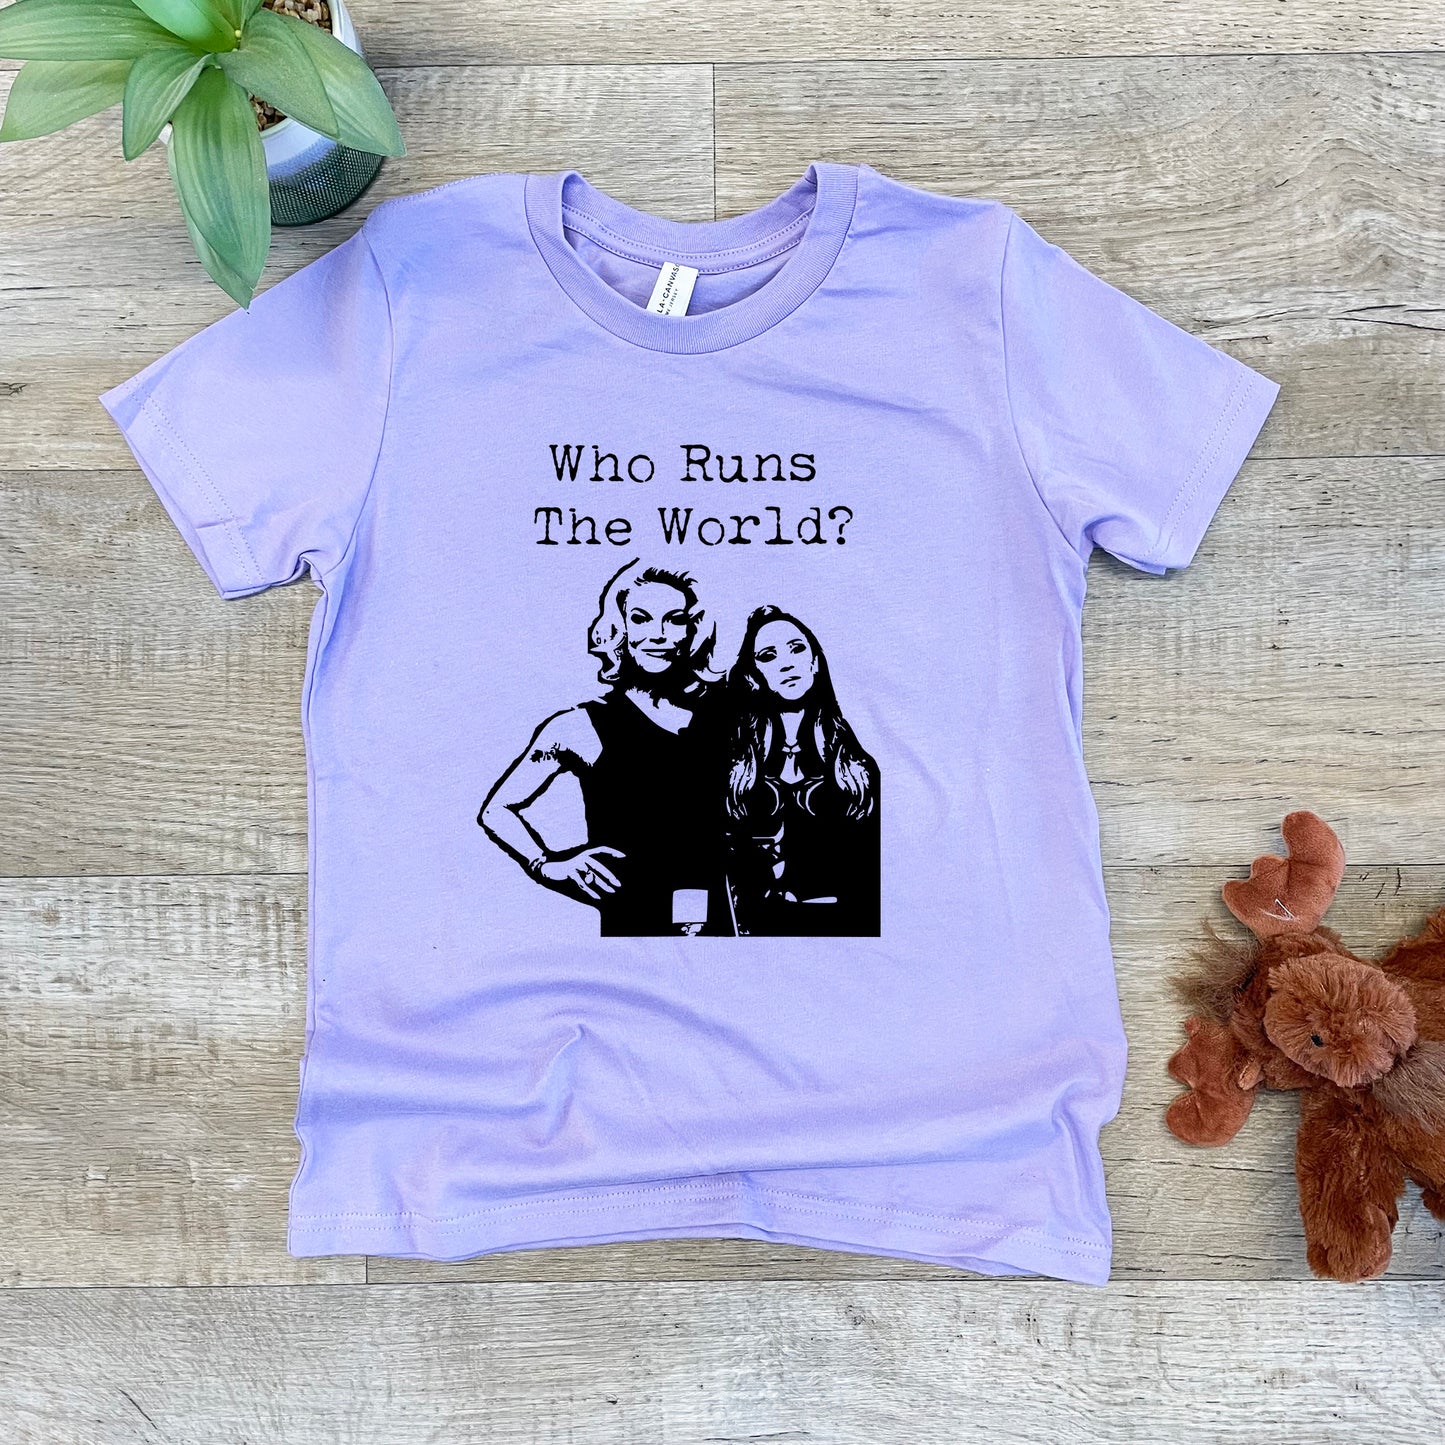 Who Runs The World - Kid's Tee - Columbia Blue or Lavender